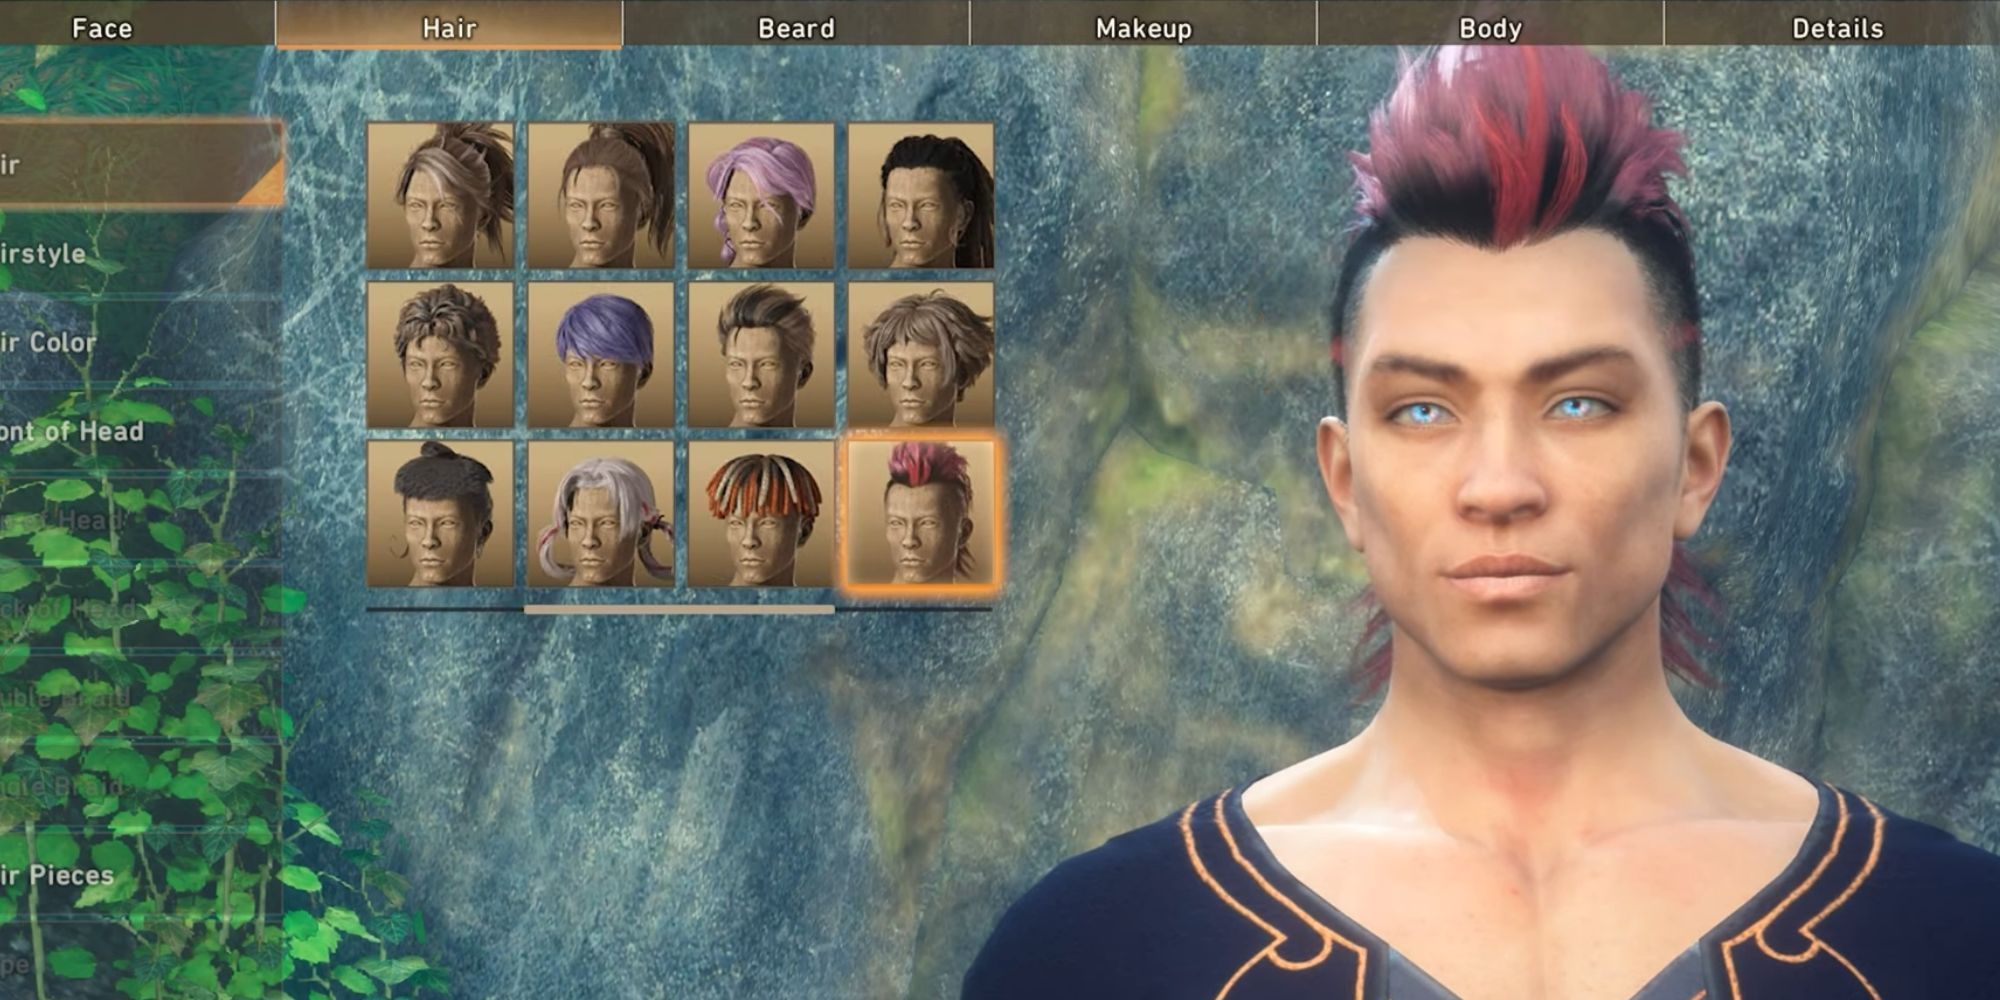 Creating a character in Wild Hearts. The customisation is currently set to hairstyles and on the right is showing a preview of a character with pink and black hair.